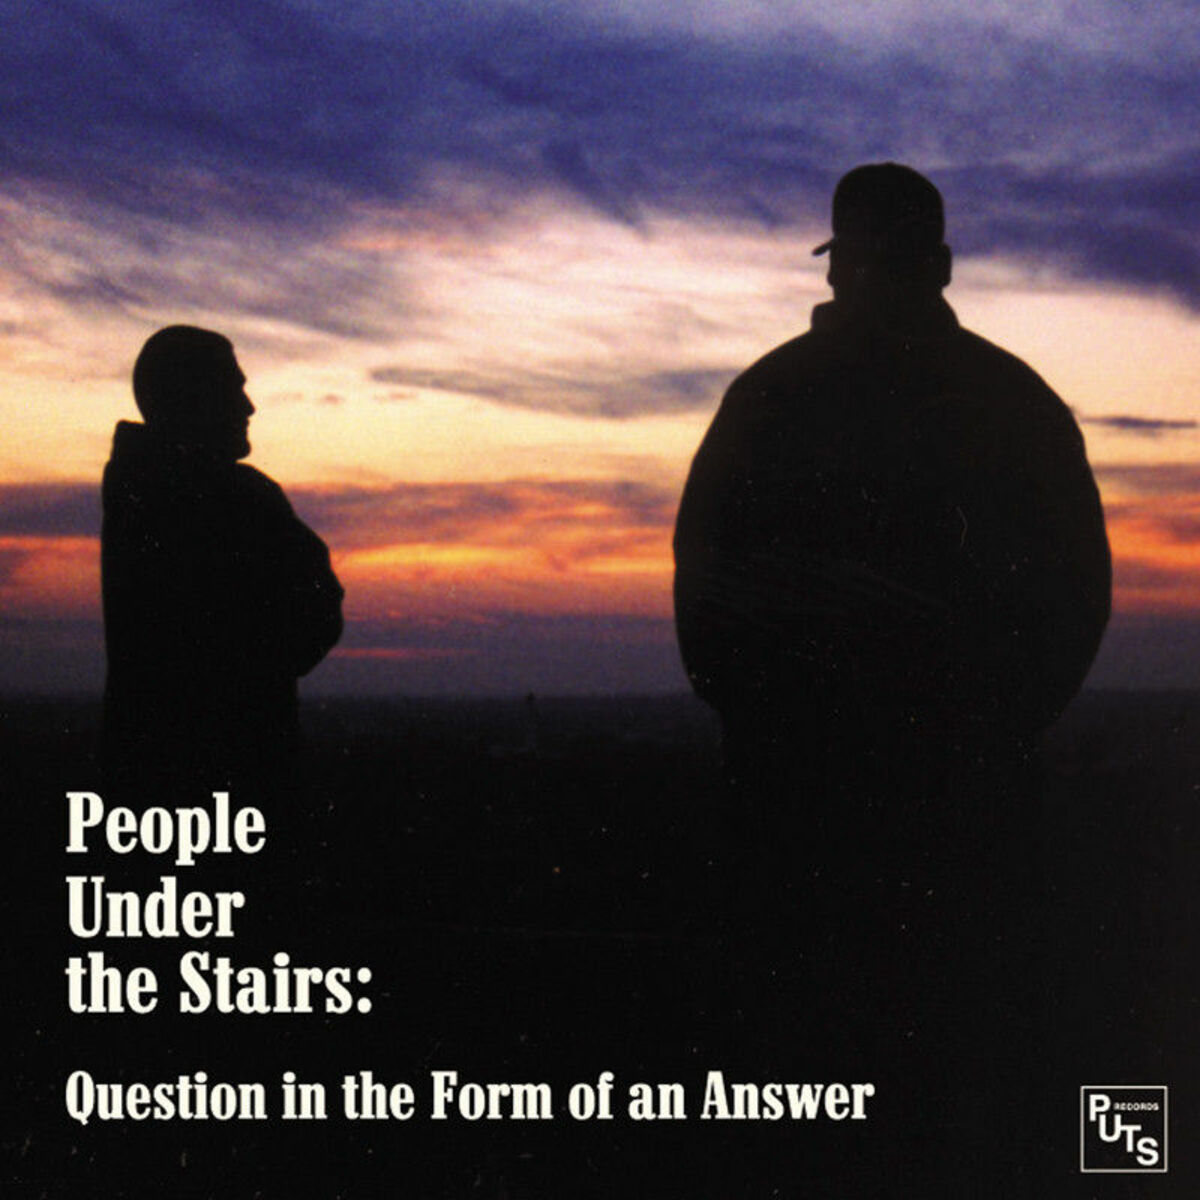 People Under the Stairs: albums, songs, playlists | Listen on Deezer